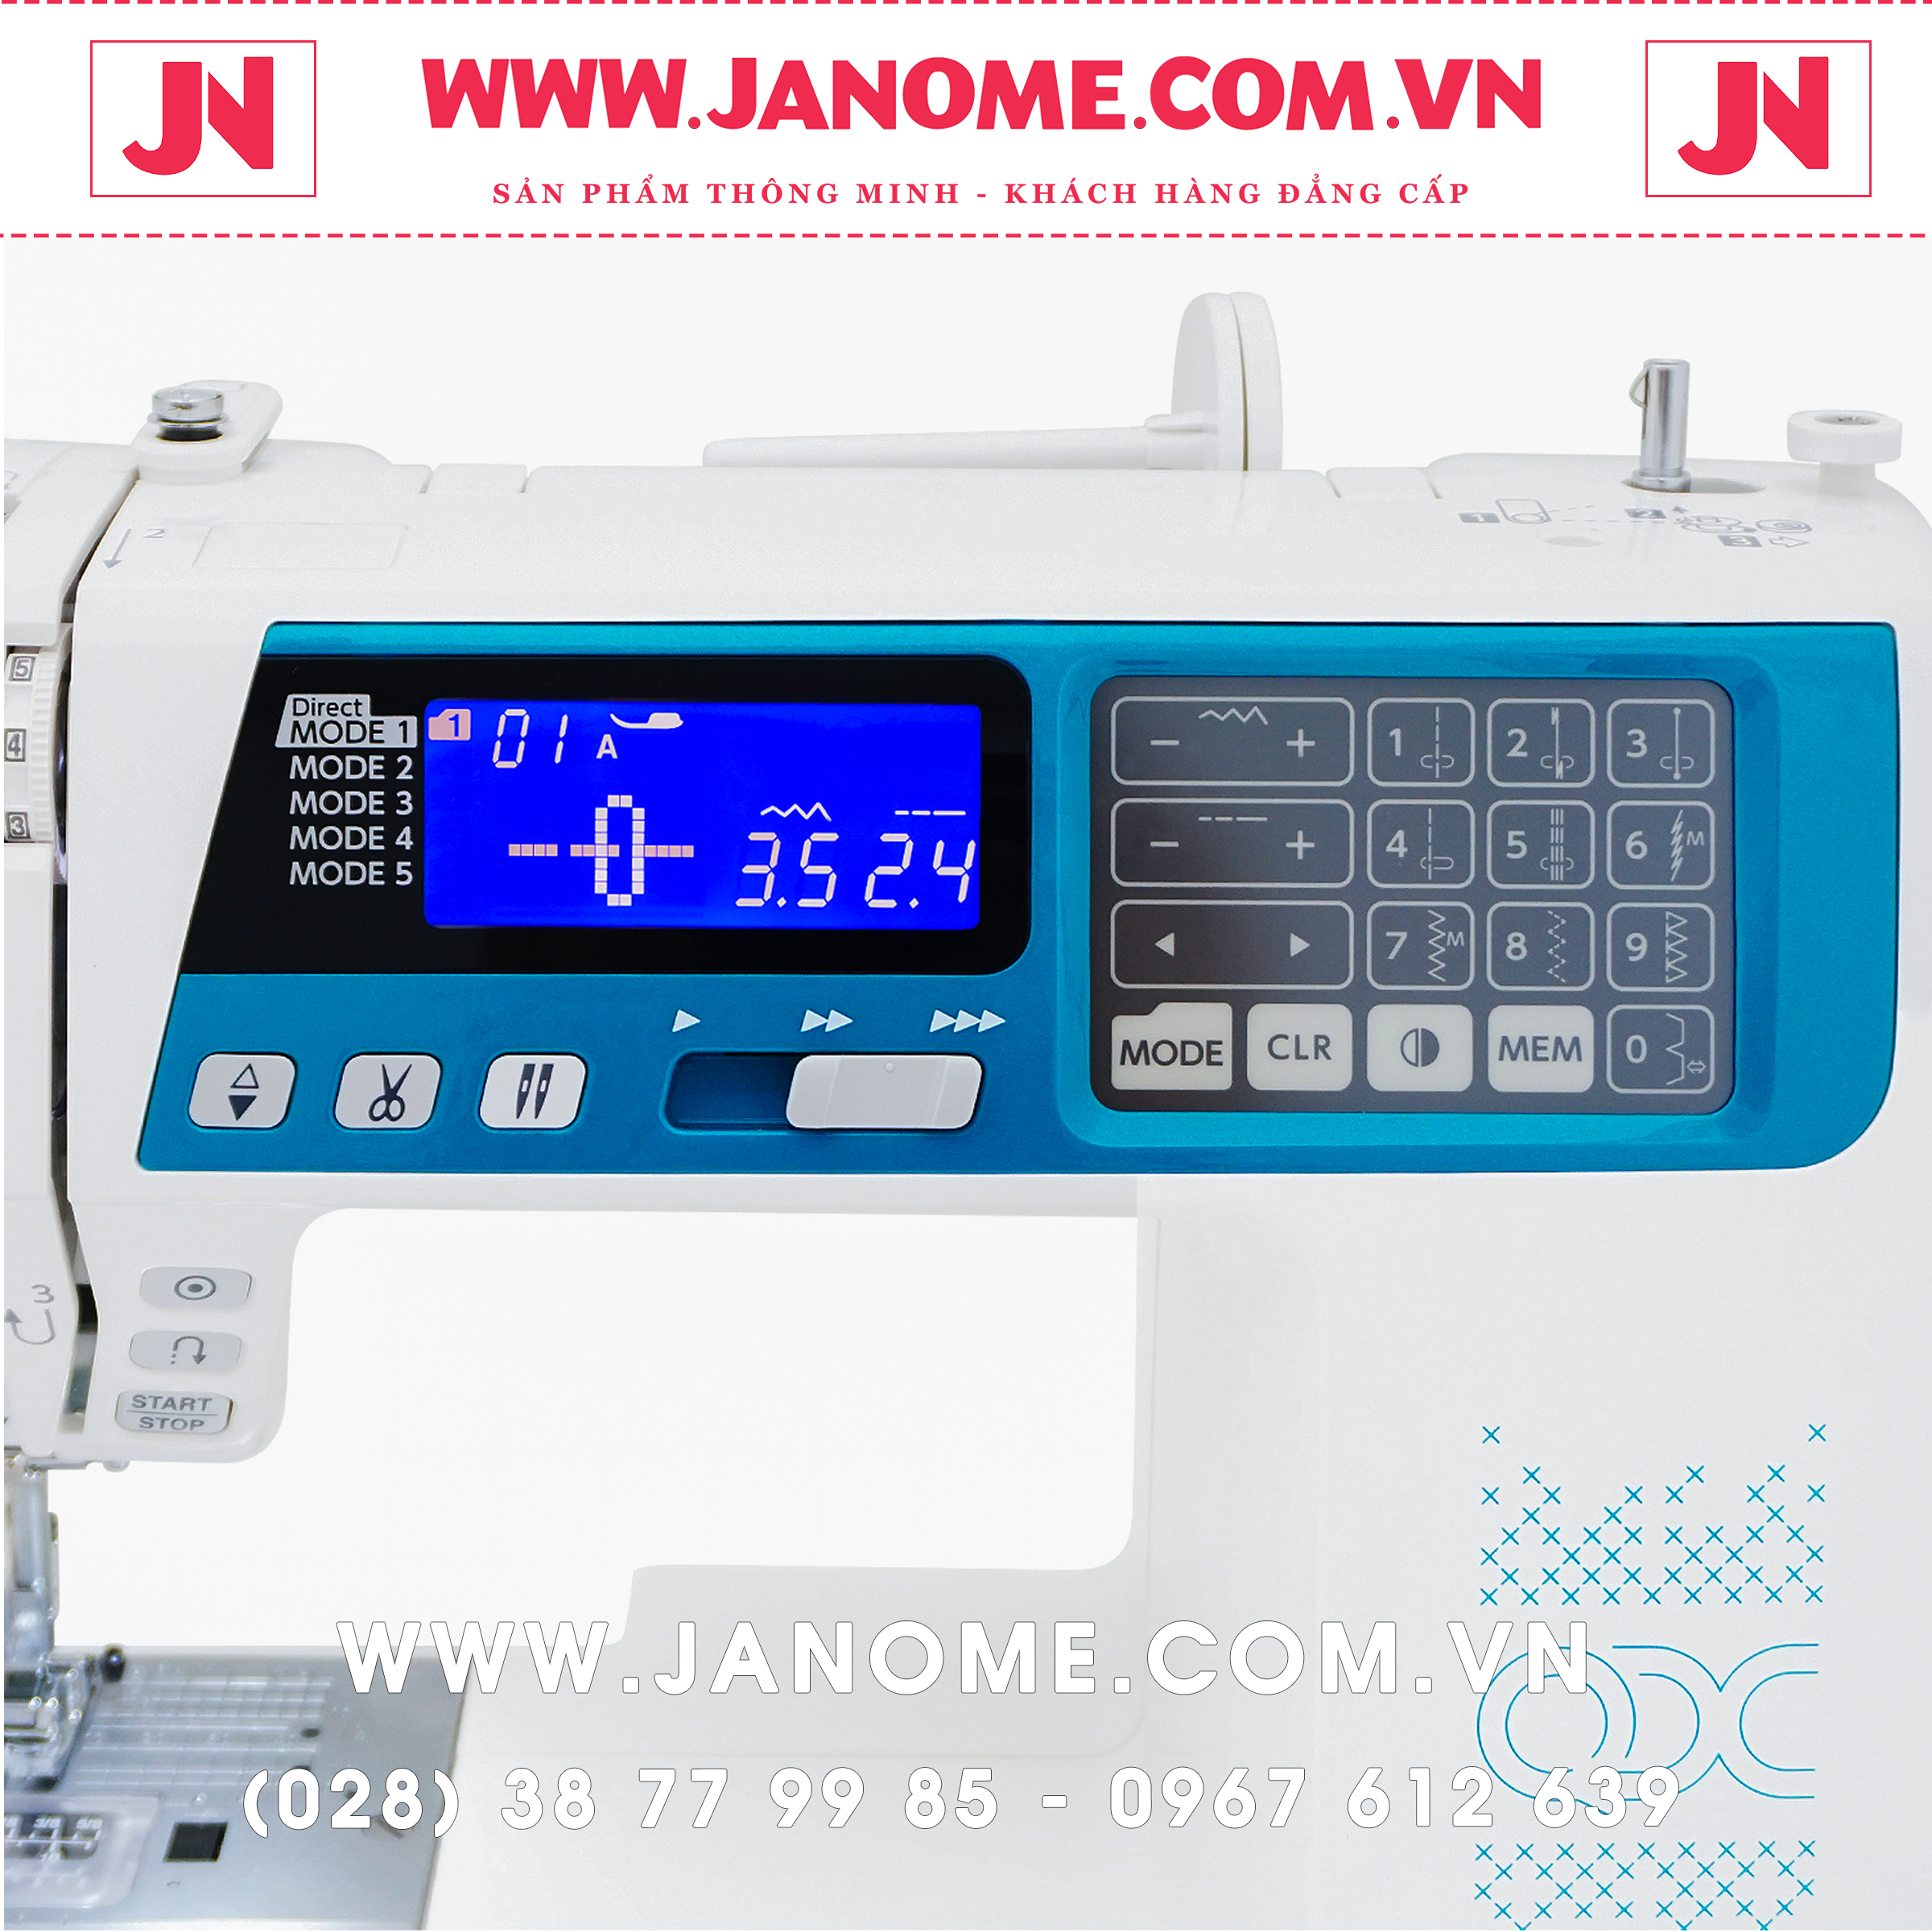 may-may-gia-dinh-dien-tu-cao-cap-janome-4300qdc